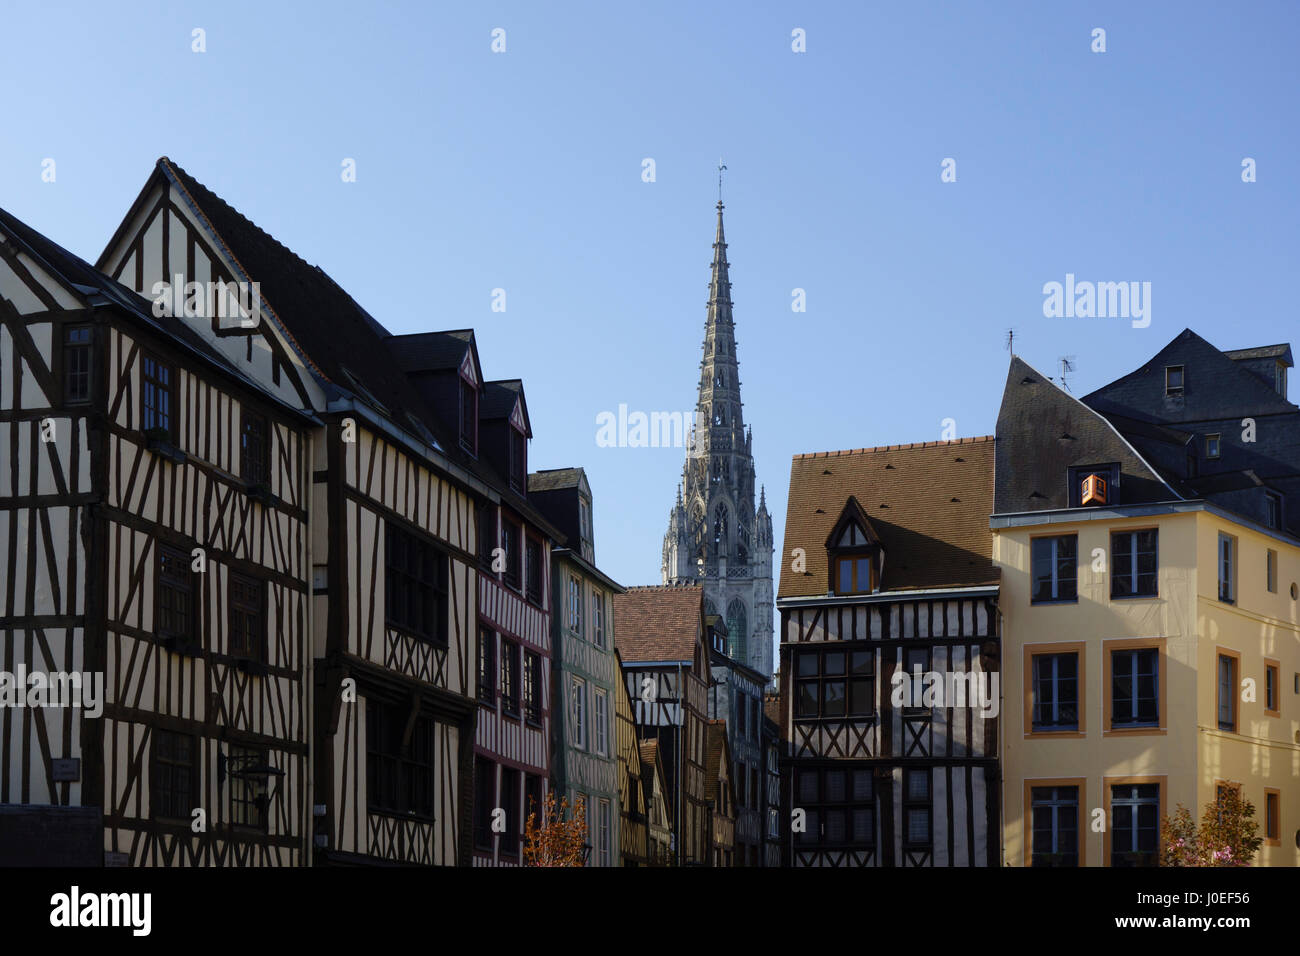 Saint aubert france hi-res stock photography and images - Alamy